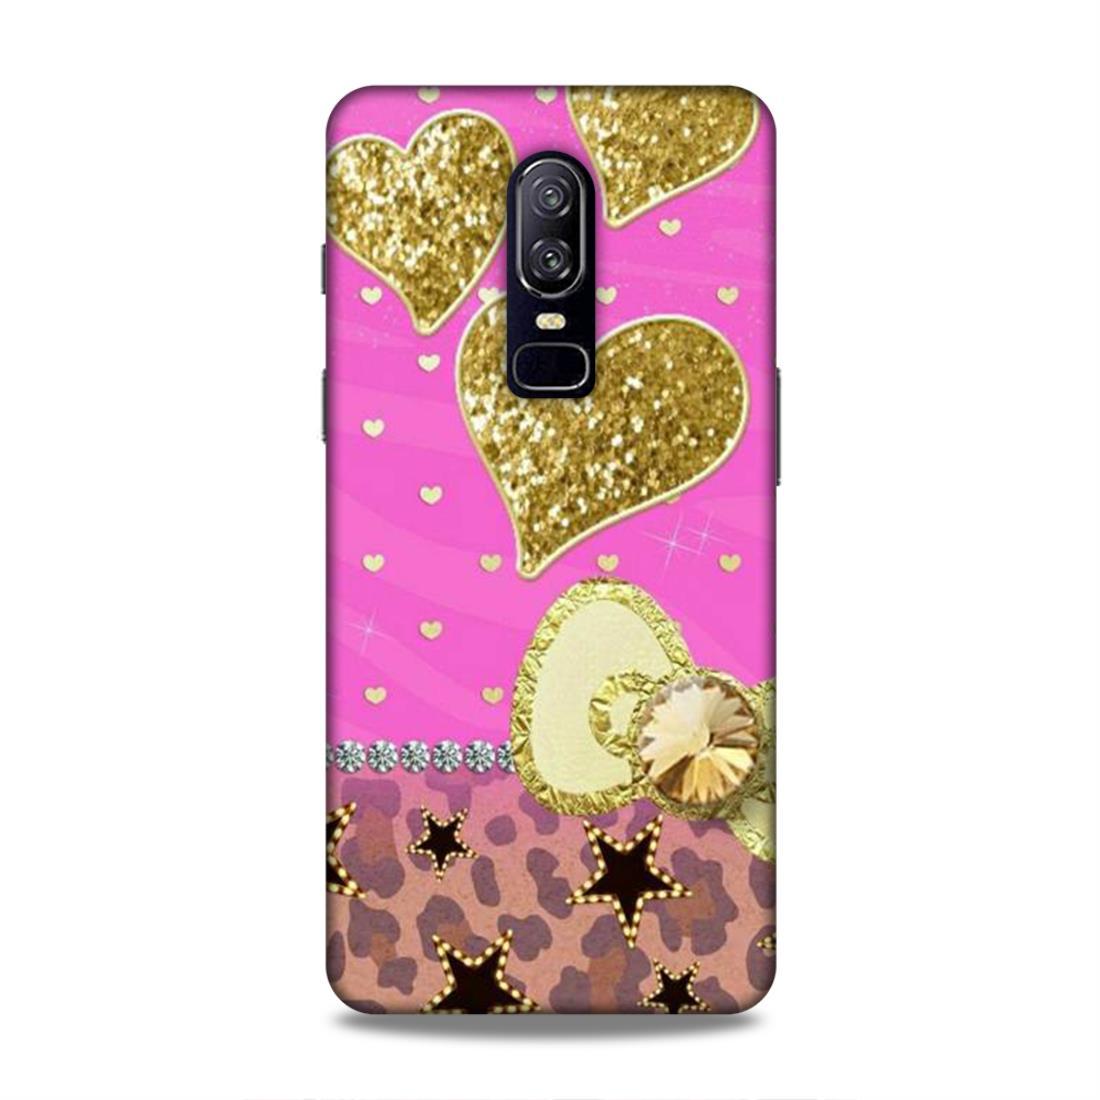 Cute Pink Heart OnePlus 6 Phone Case Cover